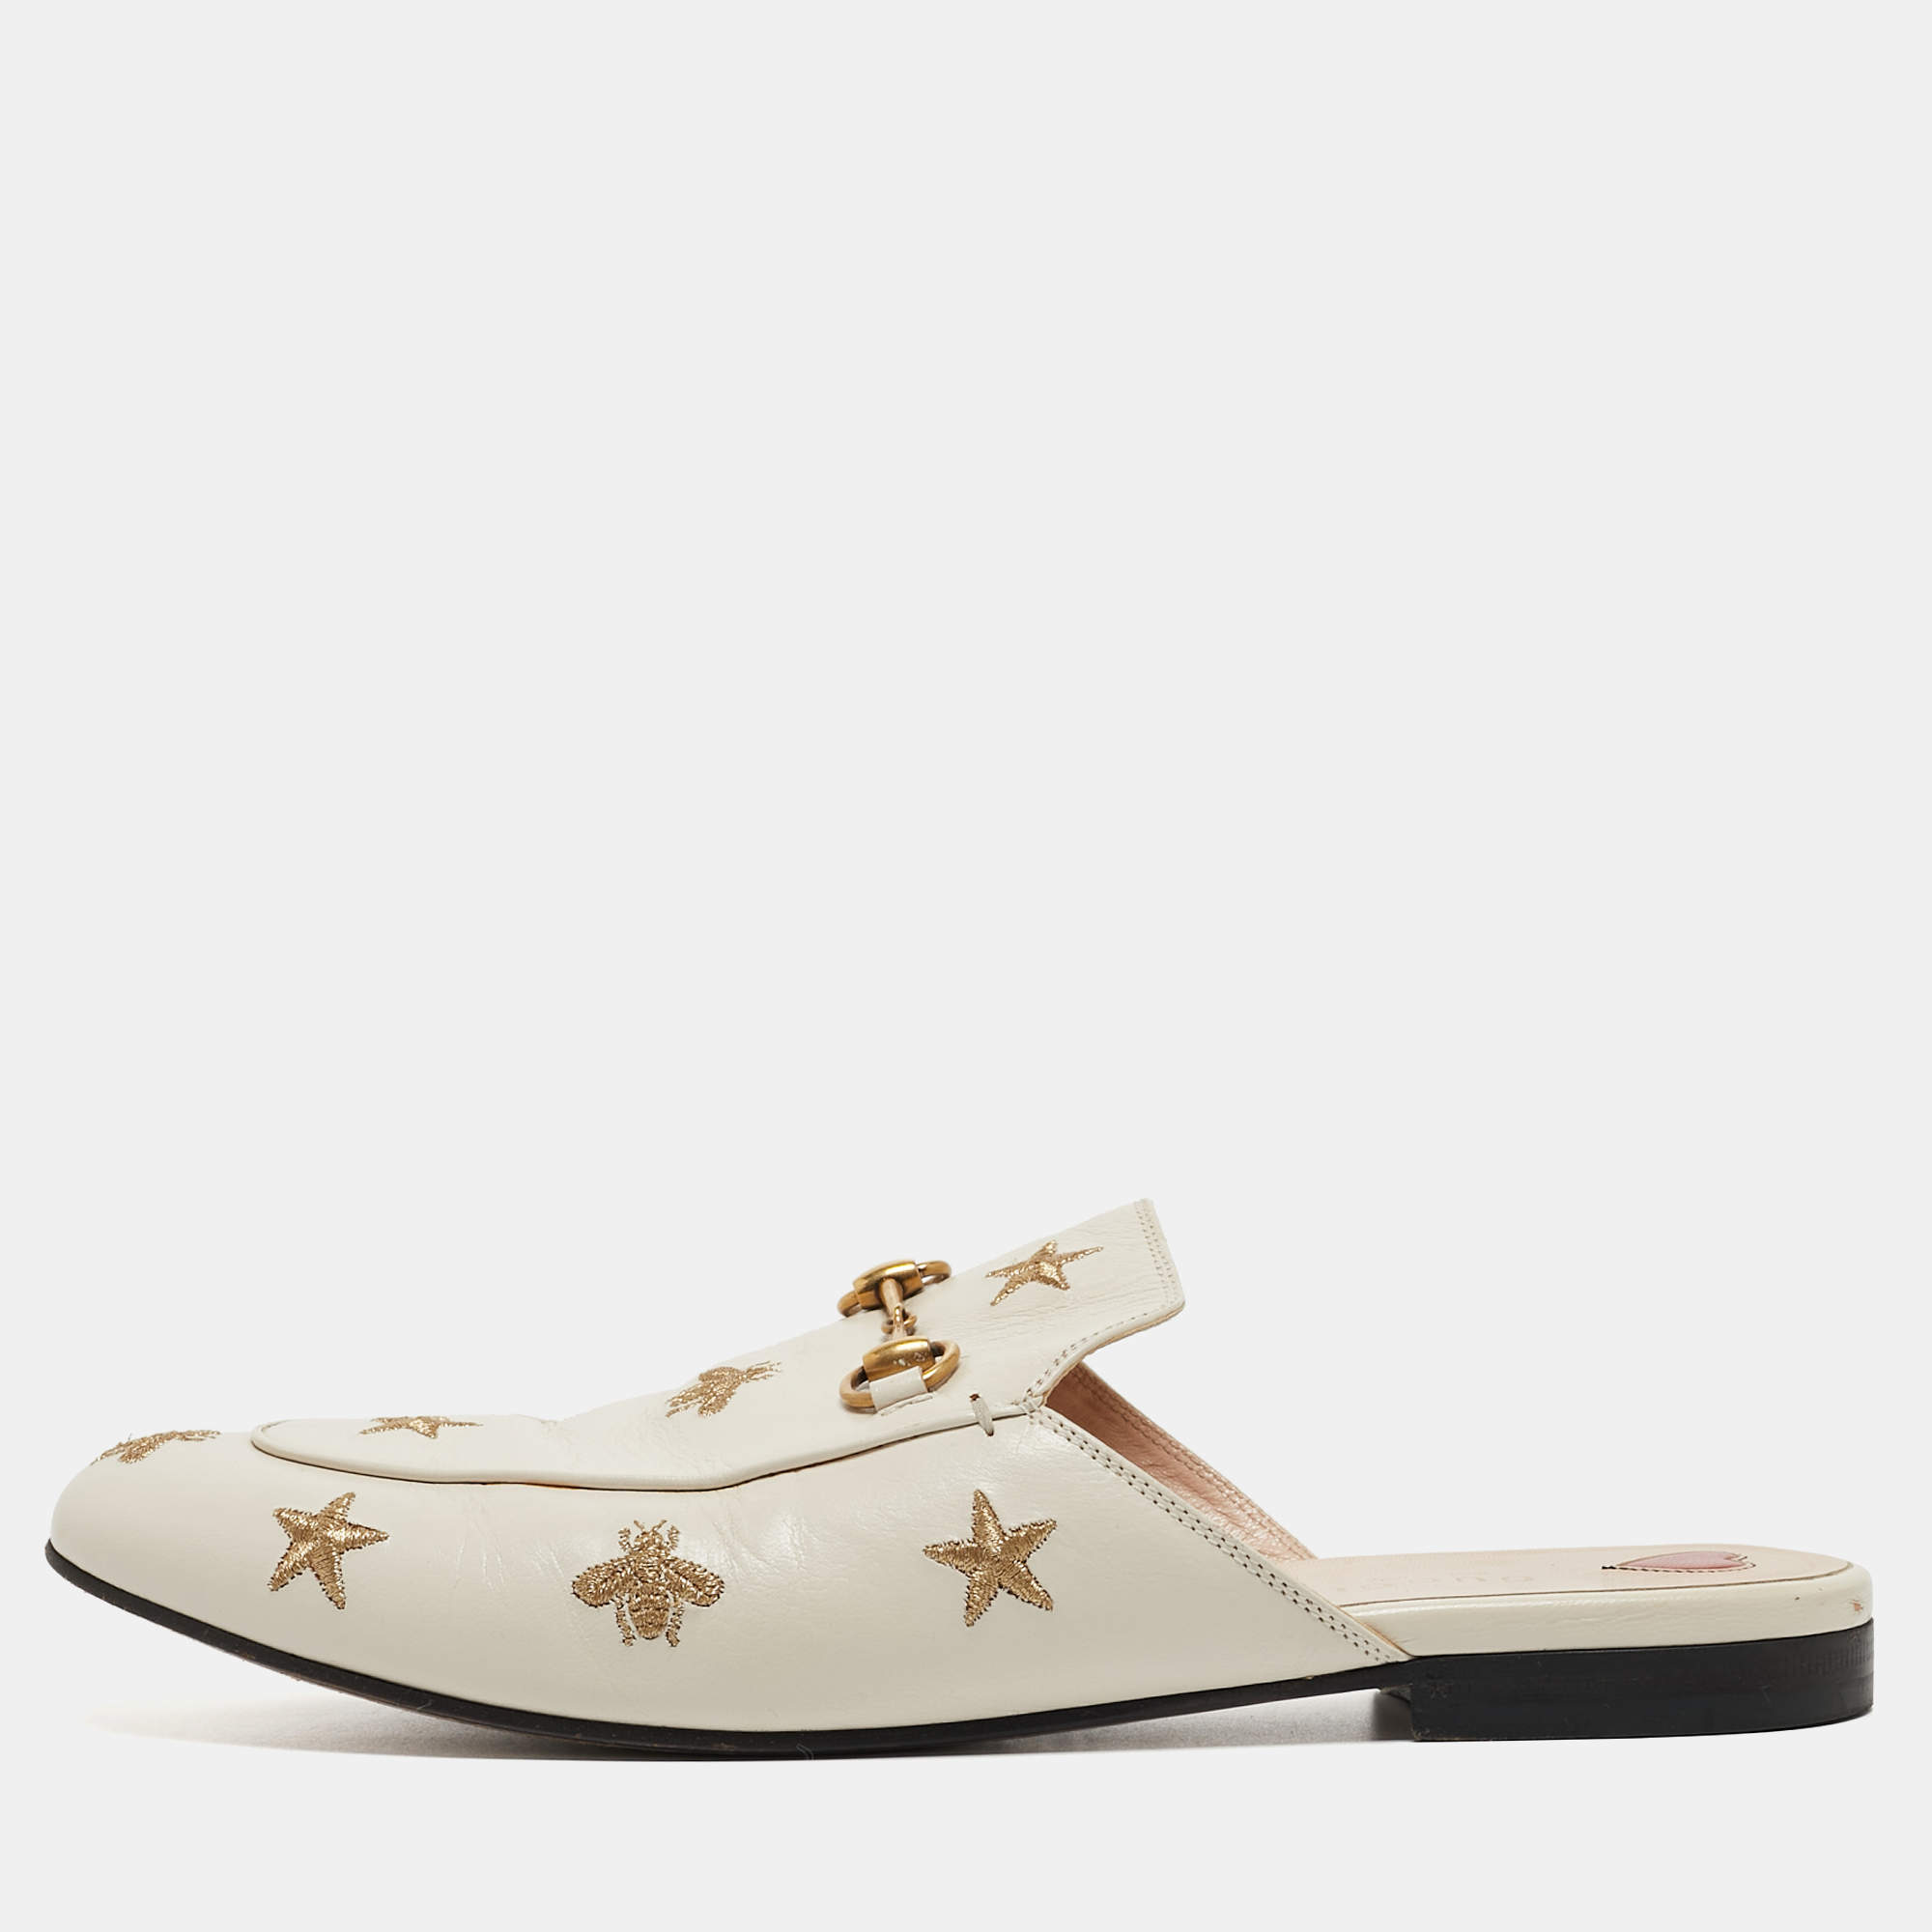 Gucci Cream Leather Bee and Star Embroidered Princetown Flat Mules Size 41.5